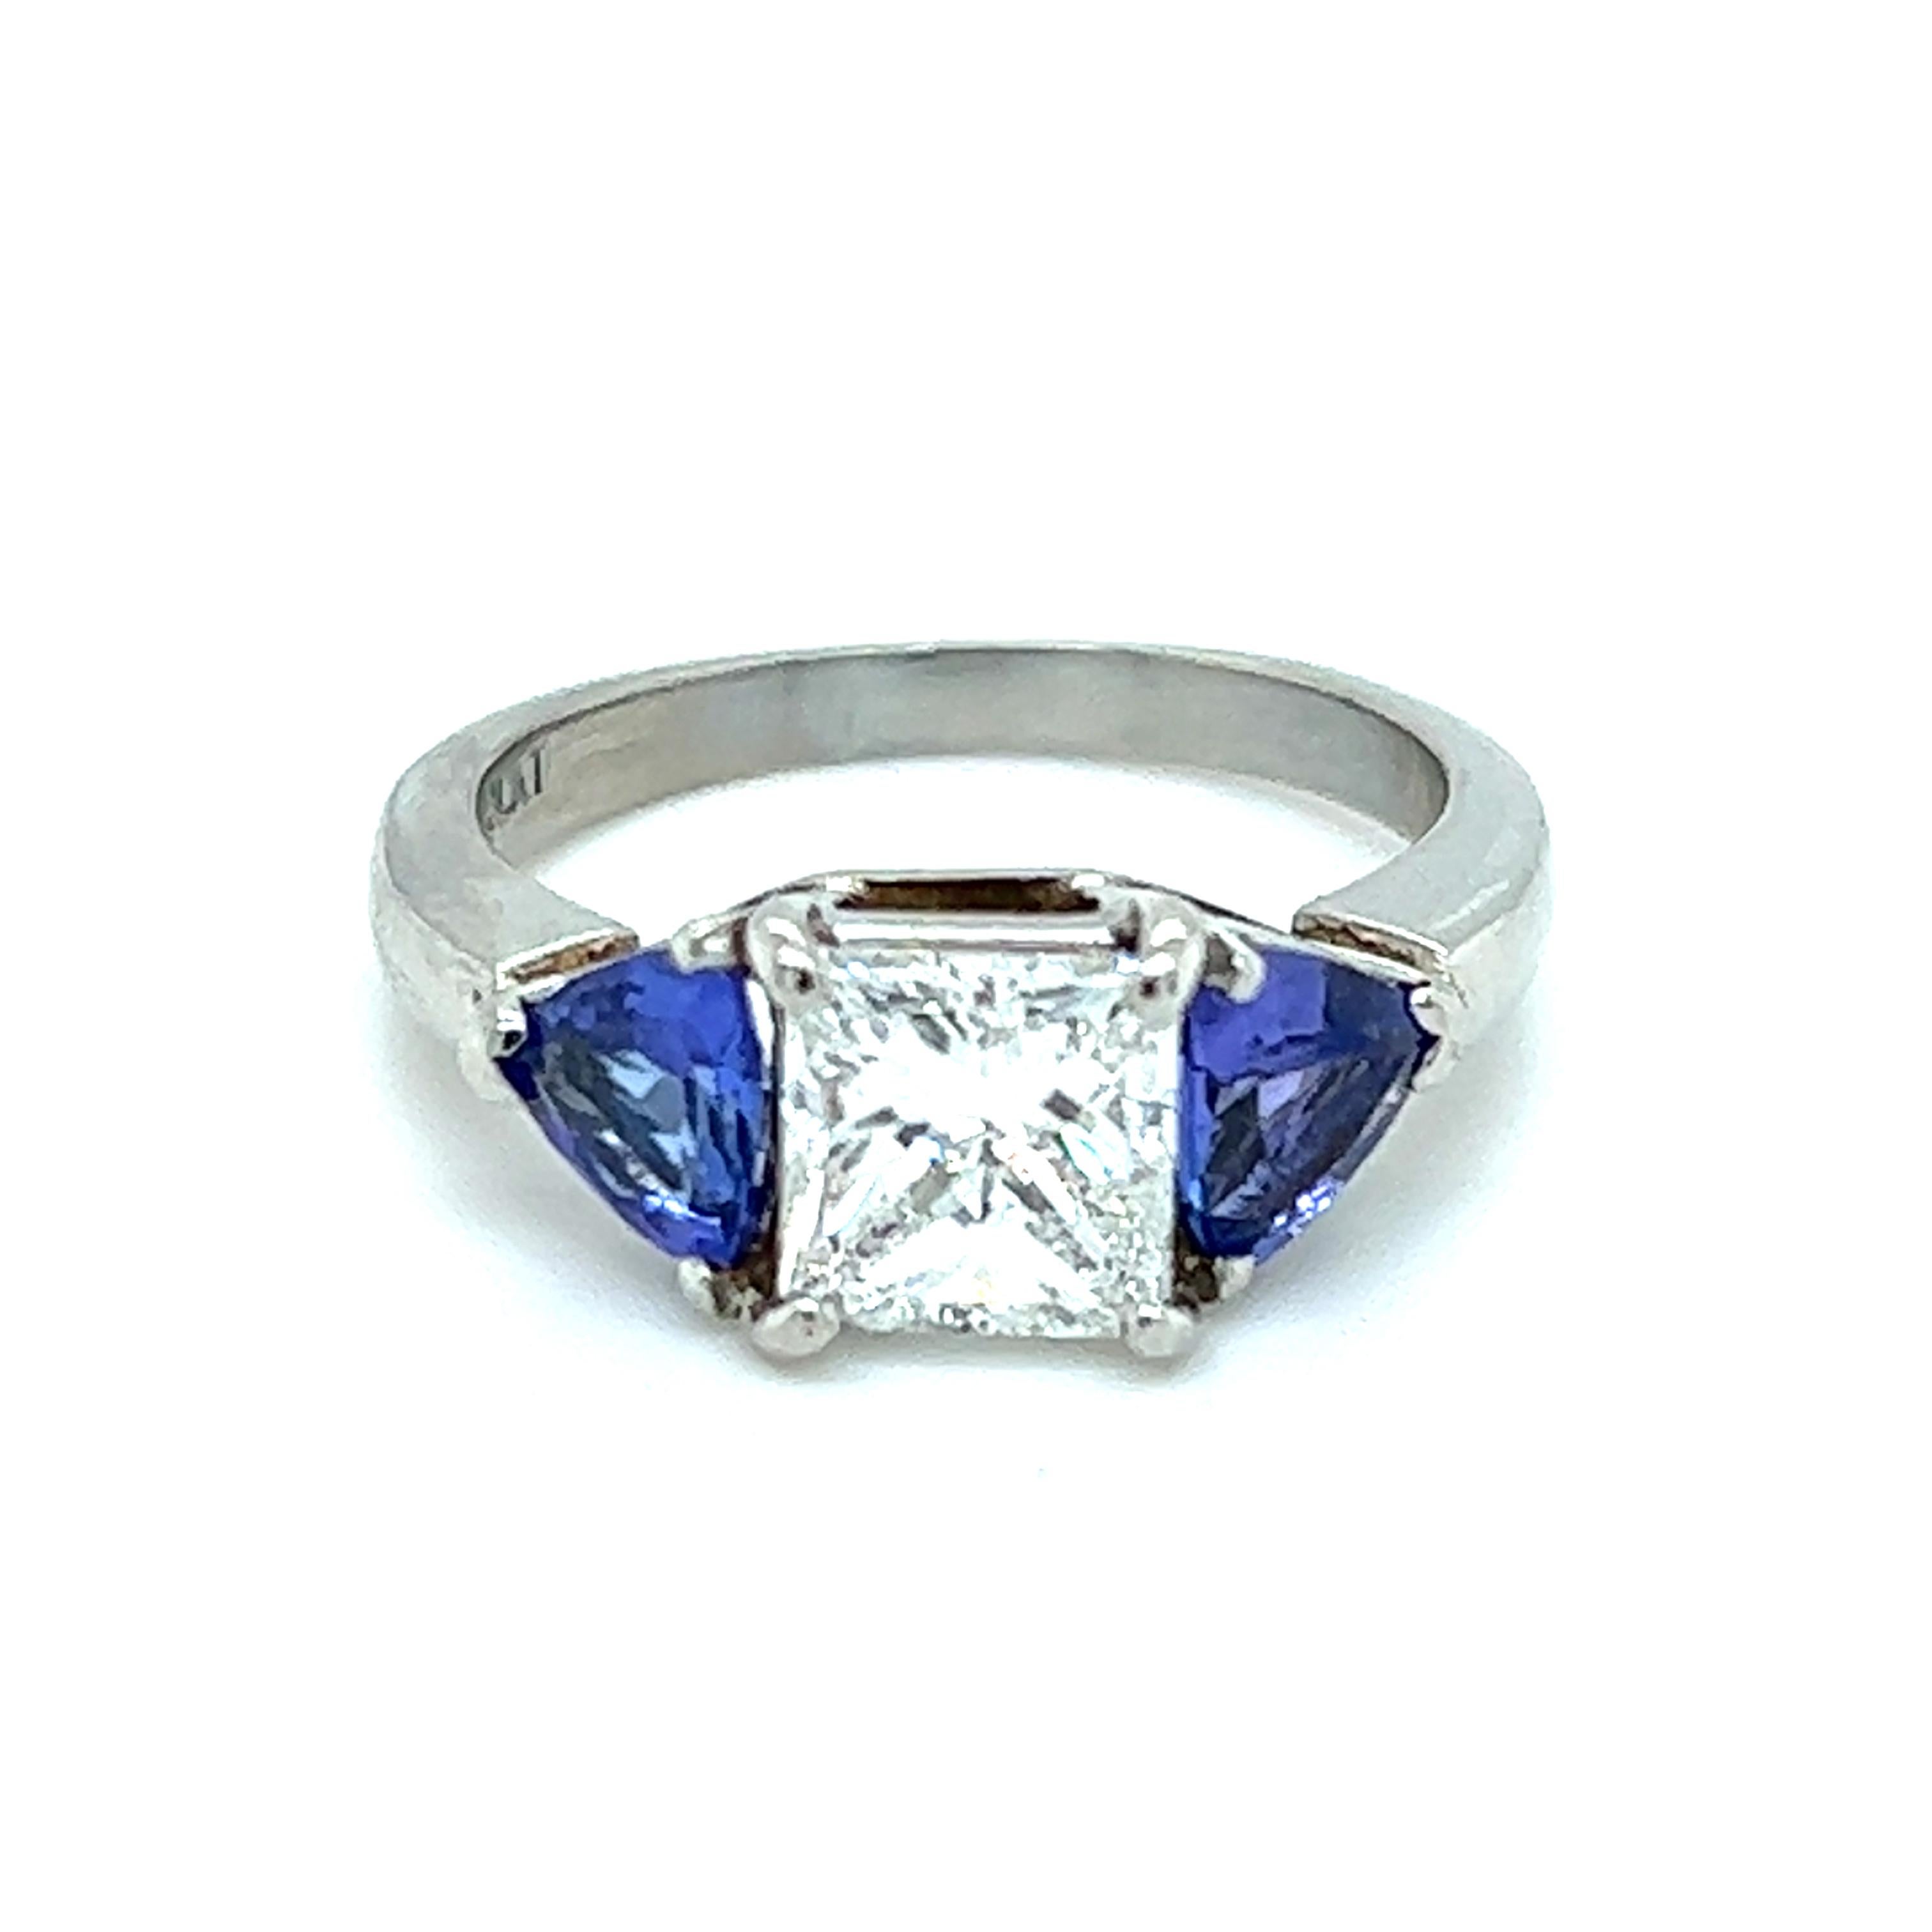 One platinum engagement ring set with one (1) 1.16 carat princess cut diamond with E color and VS2 clarity. The center stone is  flanked by two (2) trillion cut tanzanite stones measuring 5.5mm. The ring is stamped PLAT and is a finger size 6.5. The